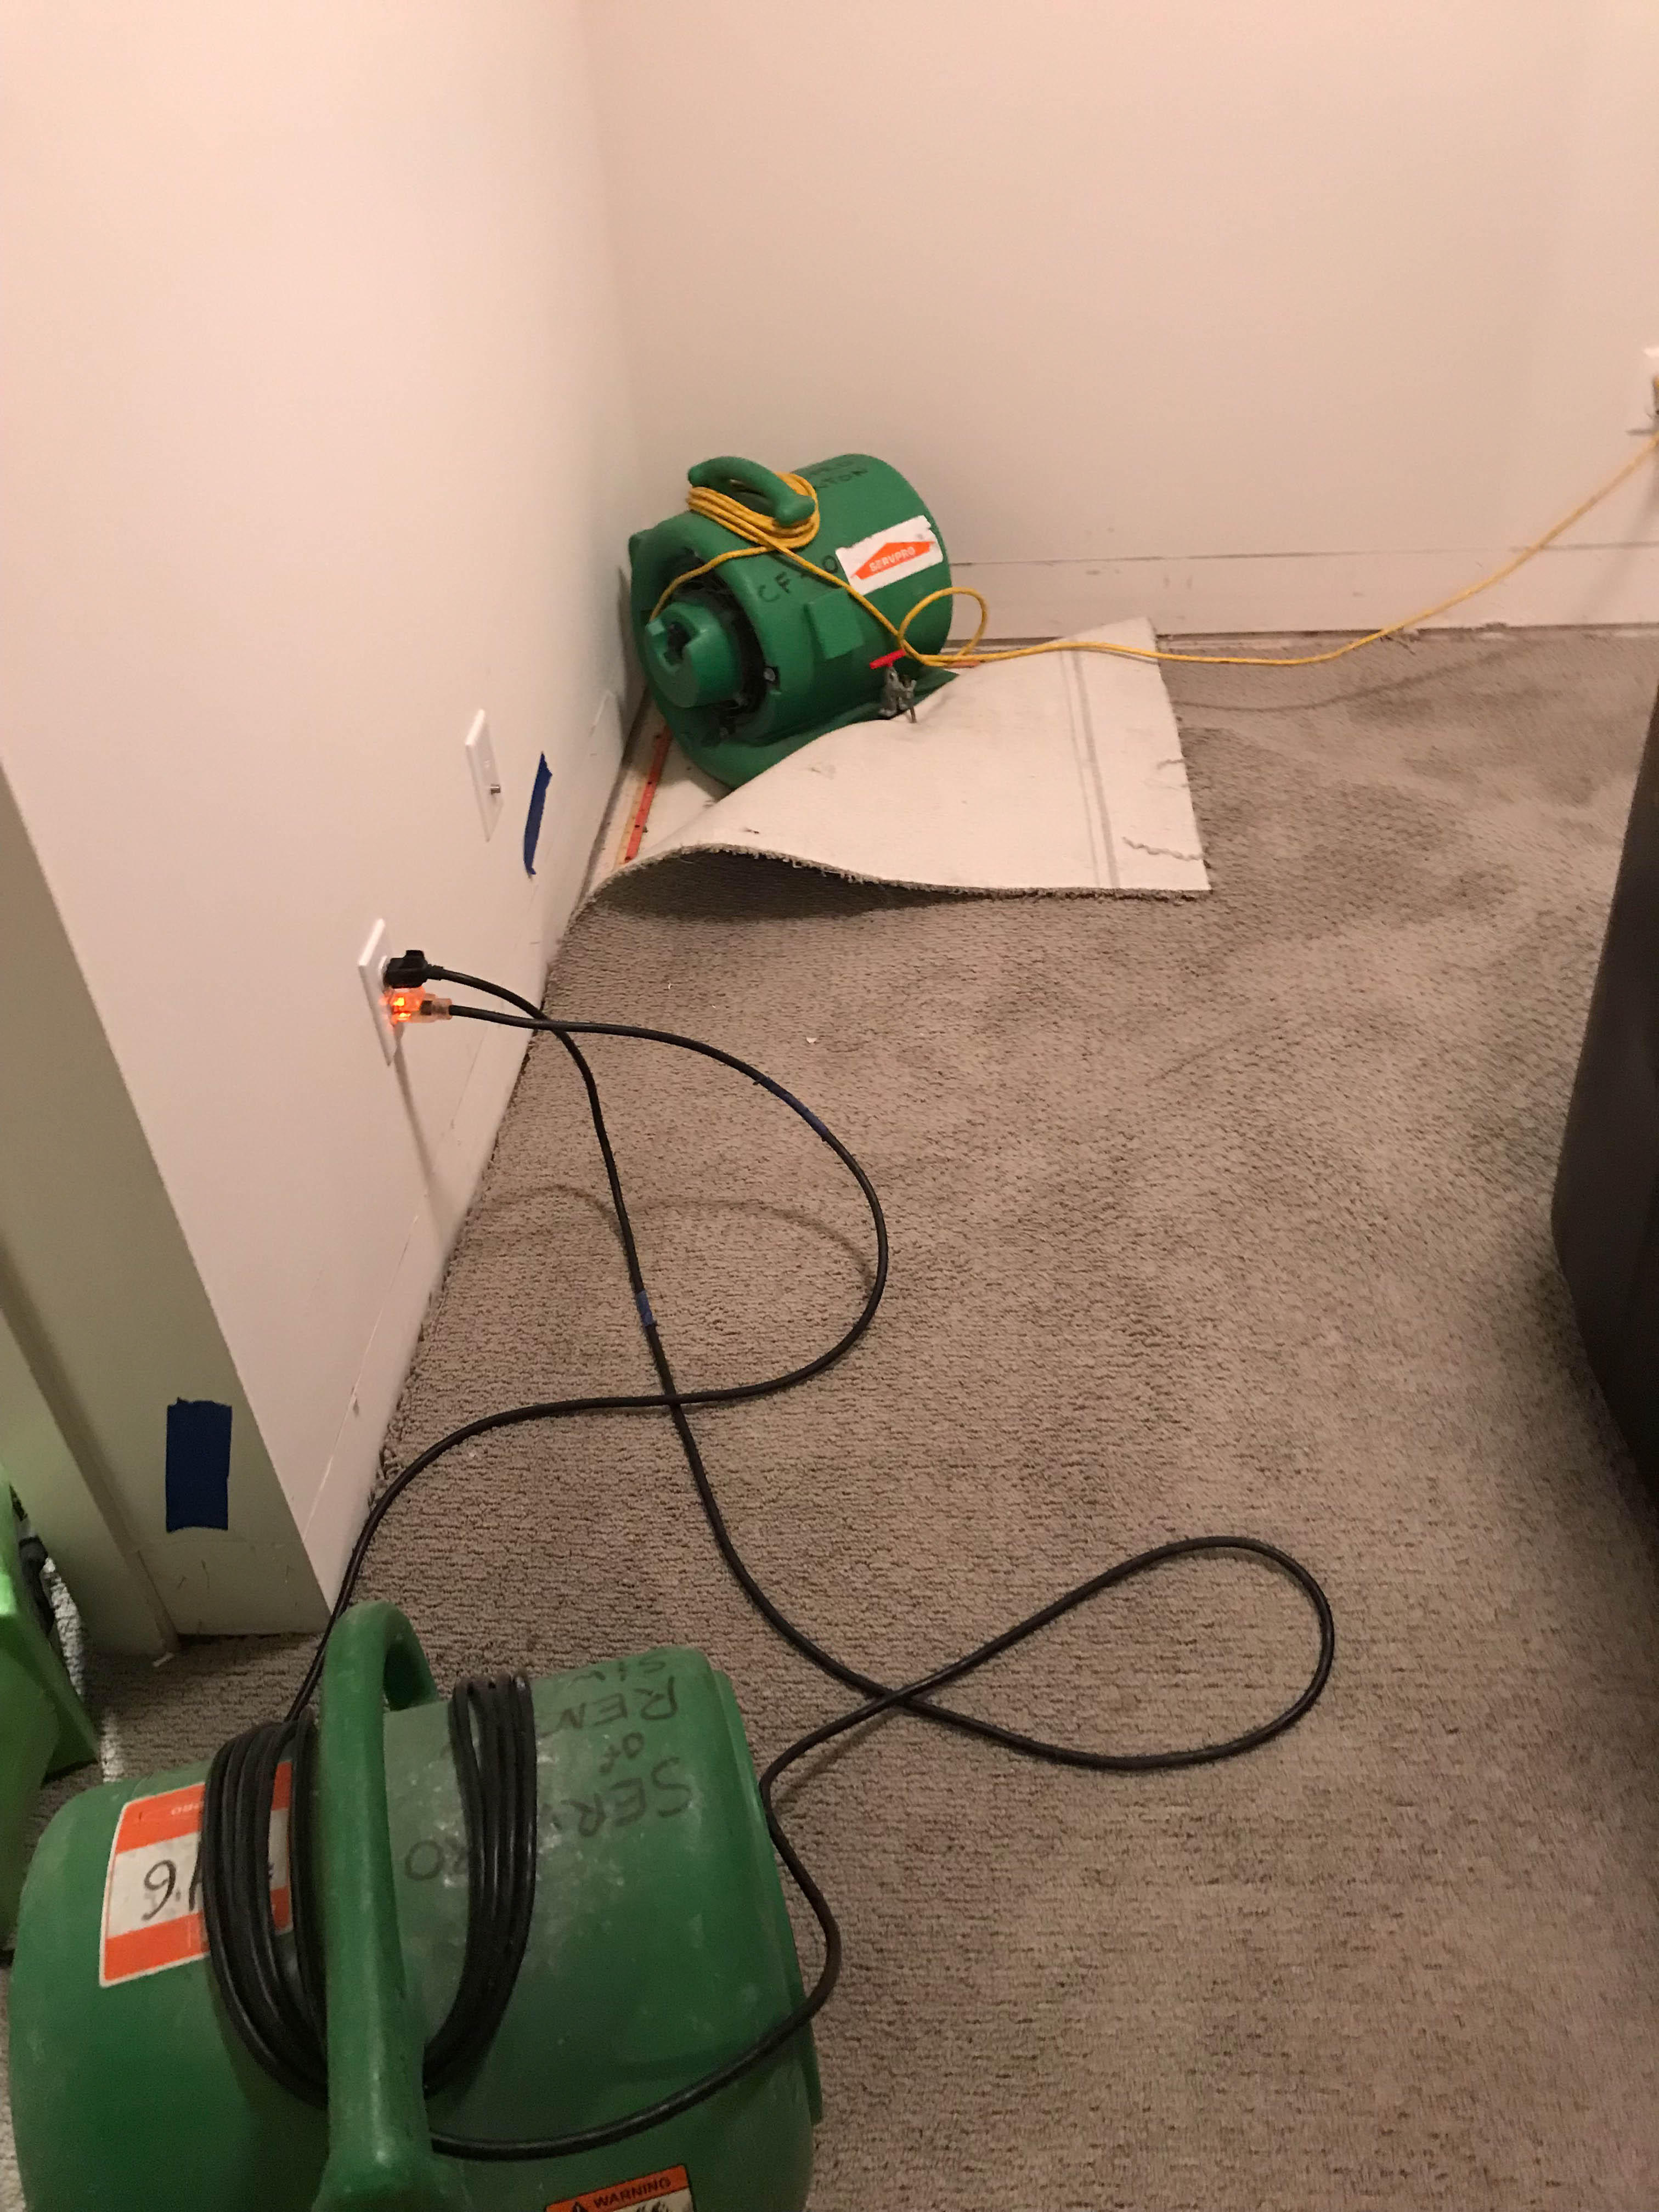 SERVPRO of Renton responded to this homeowners call when the supply line to the washing machine broke.